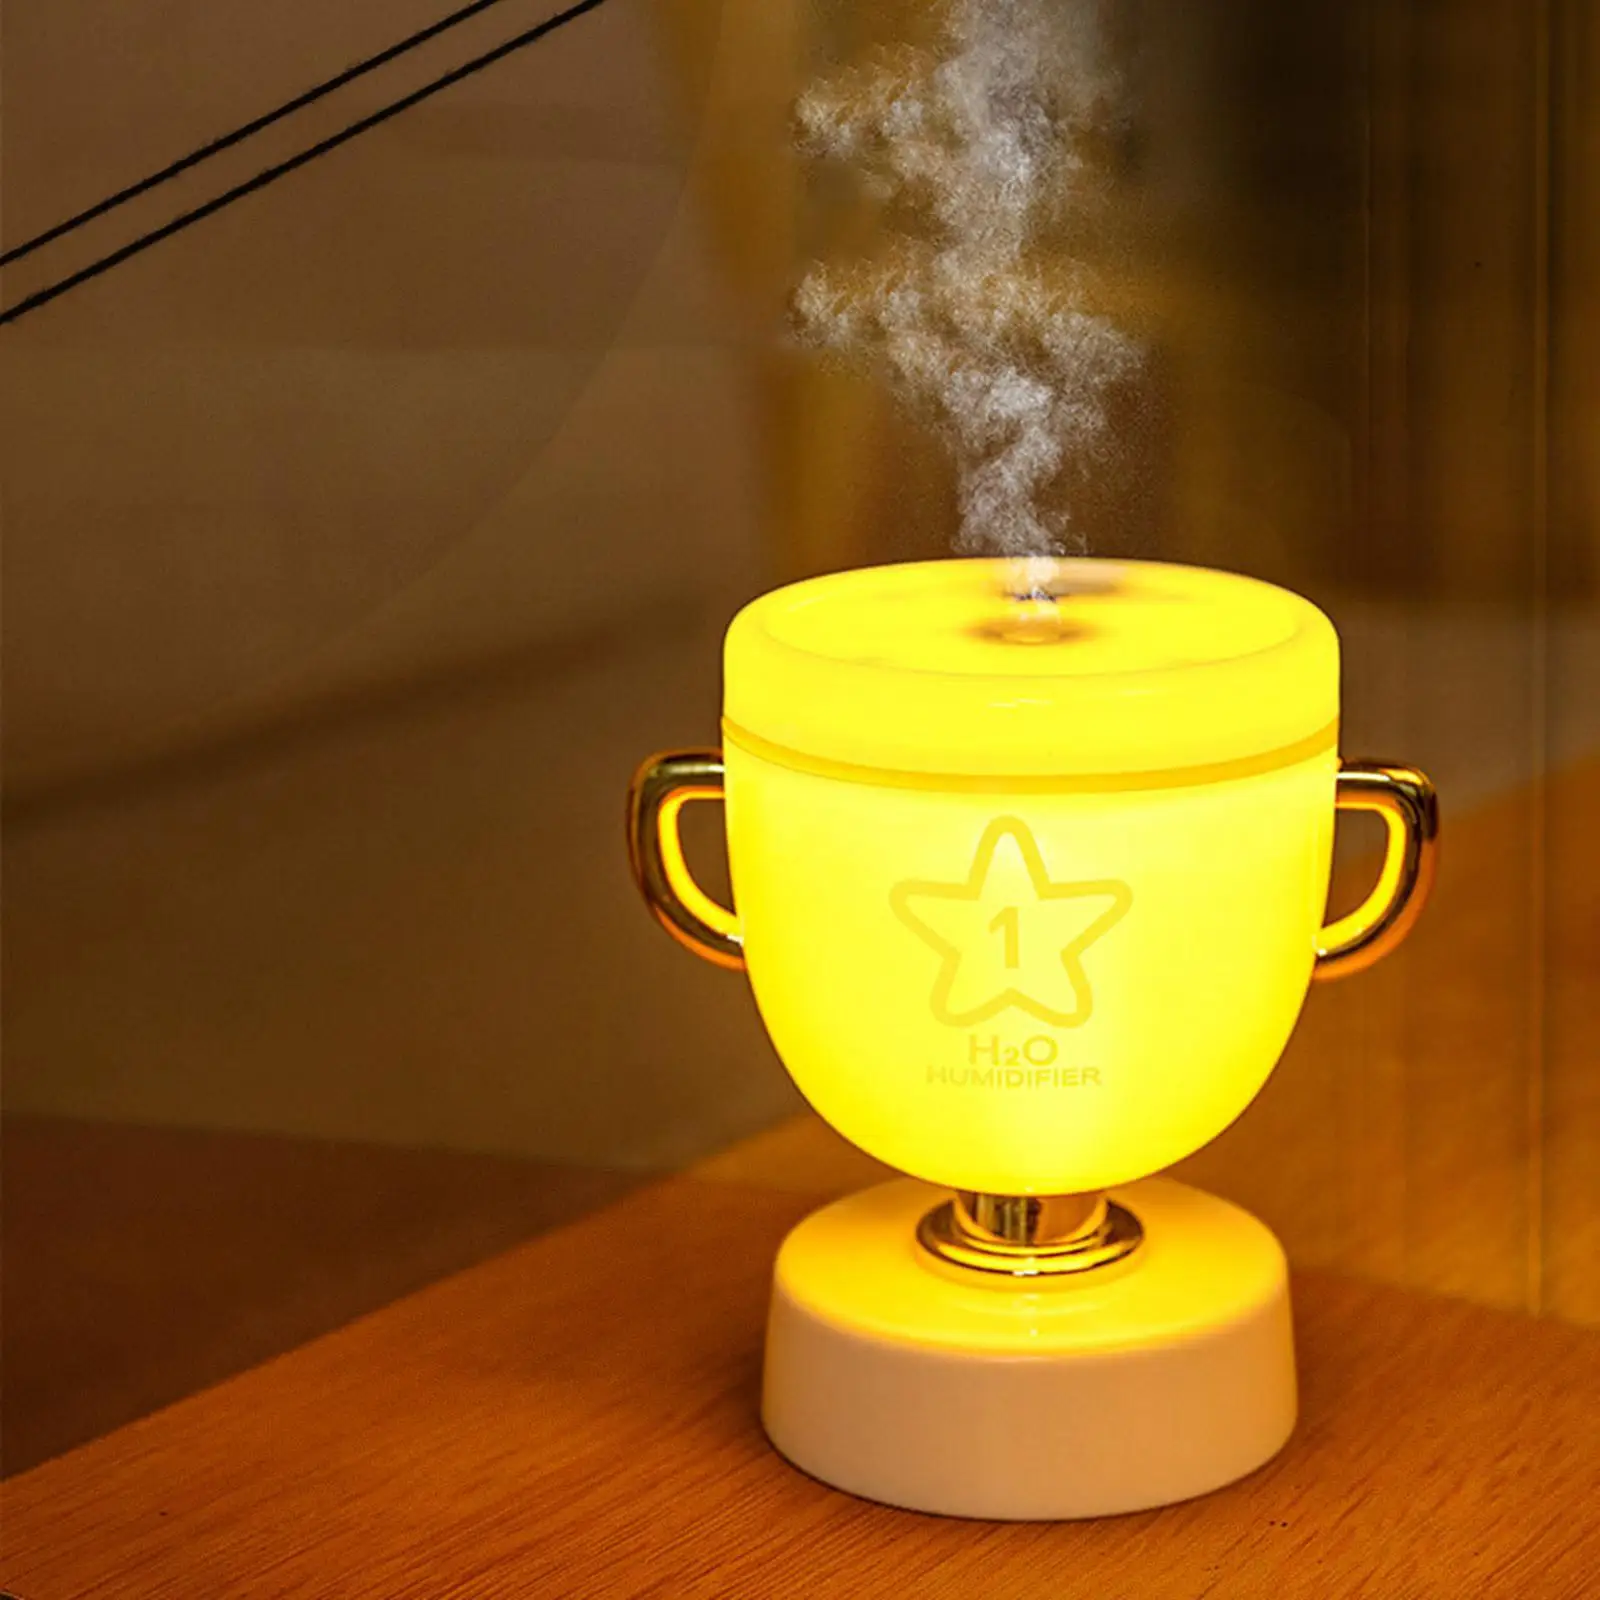 Portable Air Humidifier Night Light Humidification Silent Desk Intelligent Power Off Protection USB Diffuser for Hotel Gift Home